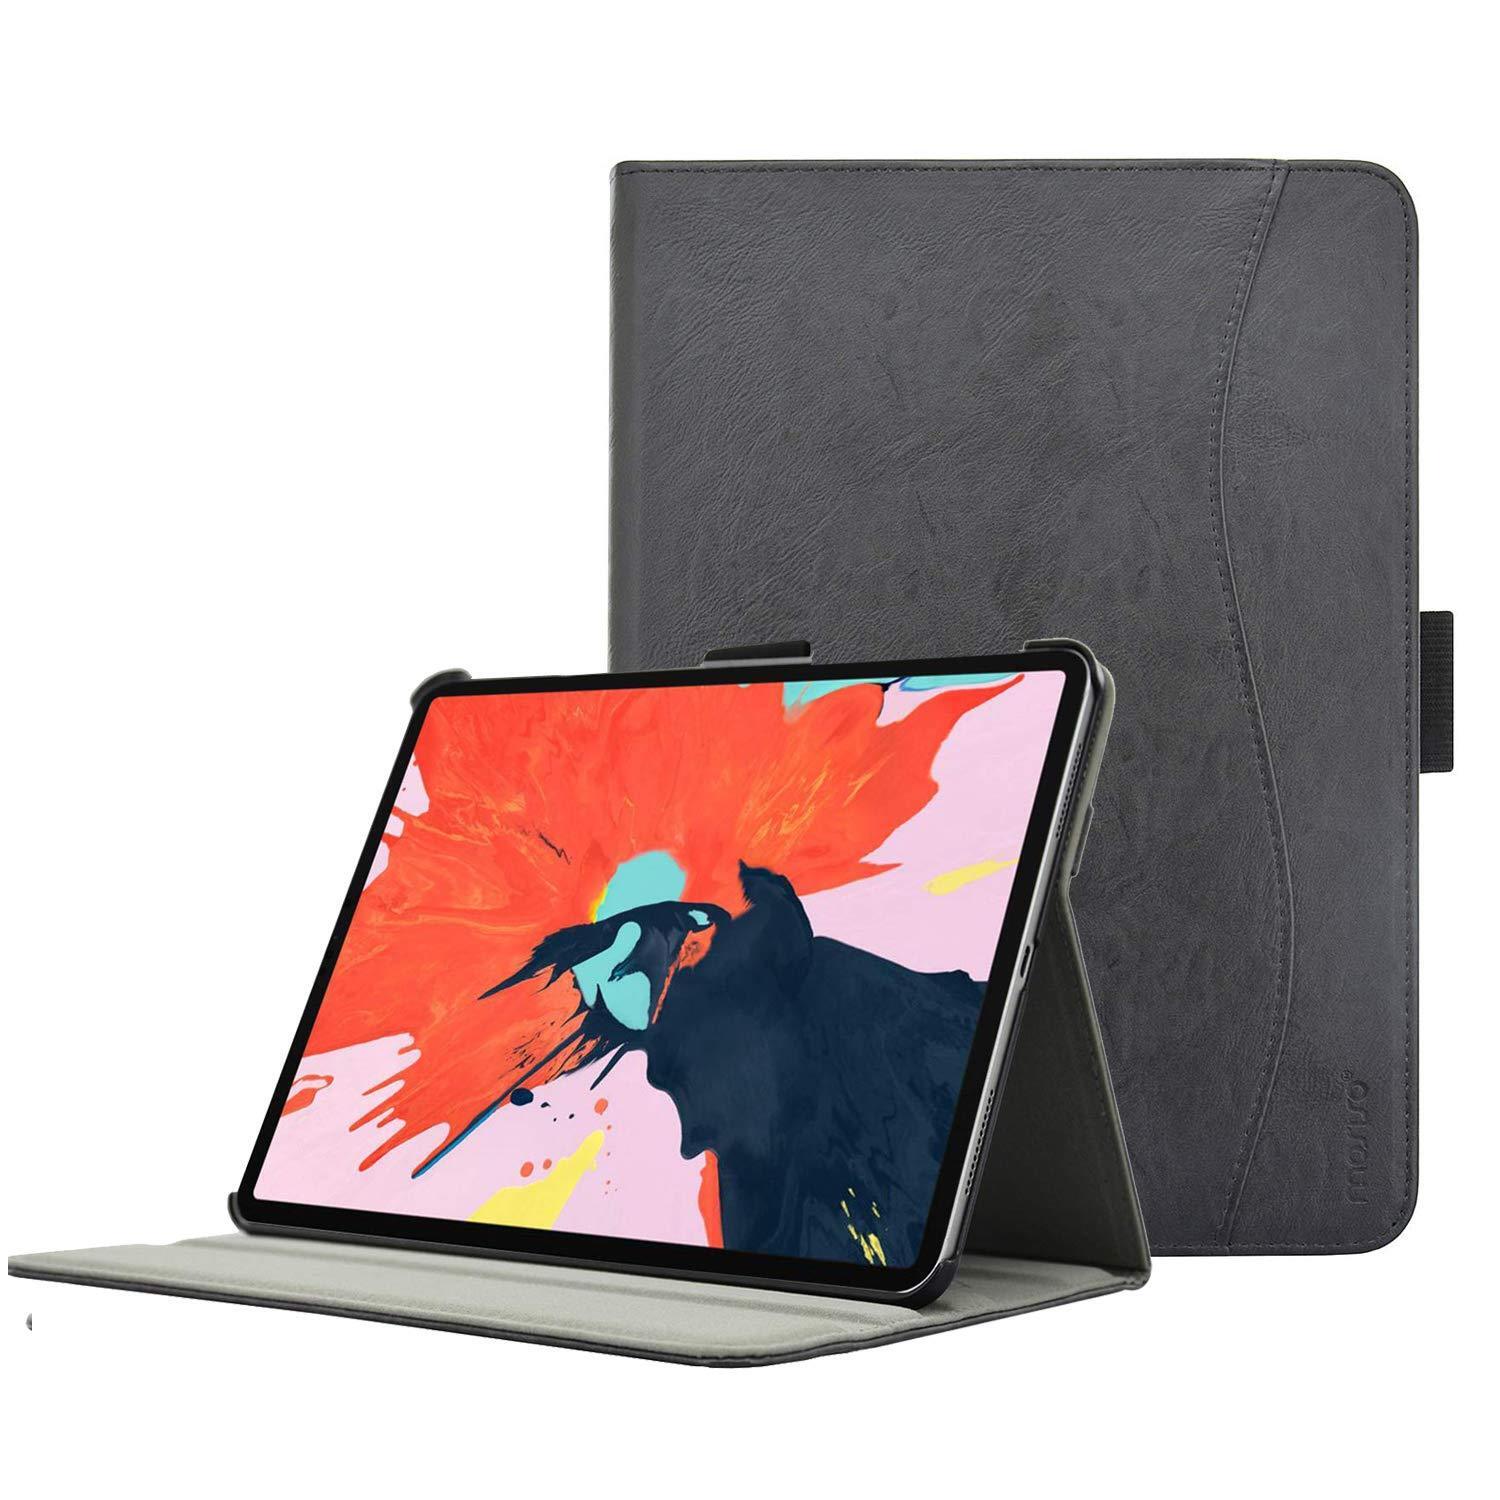 Mosiso PU Leather Stand Case for iPad Pro 11 12.9 inch 2018 Folio Tablet Cover